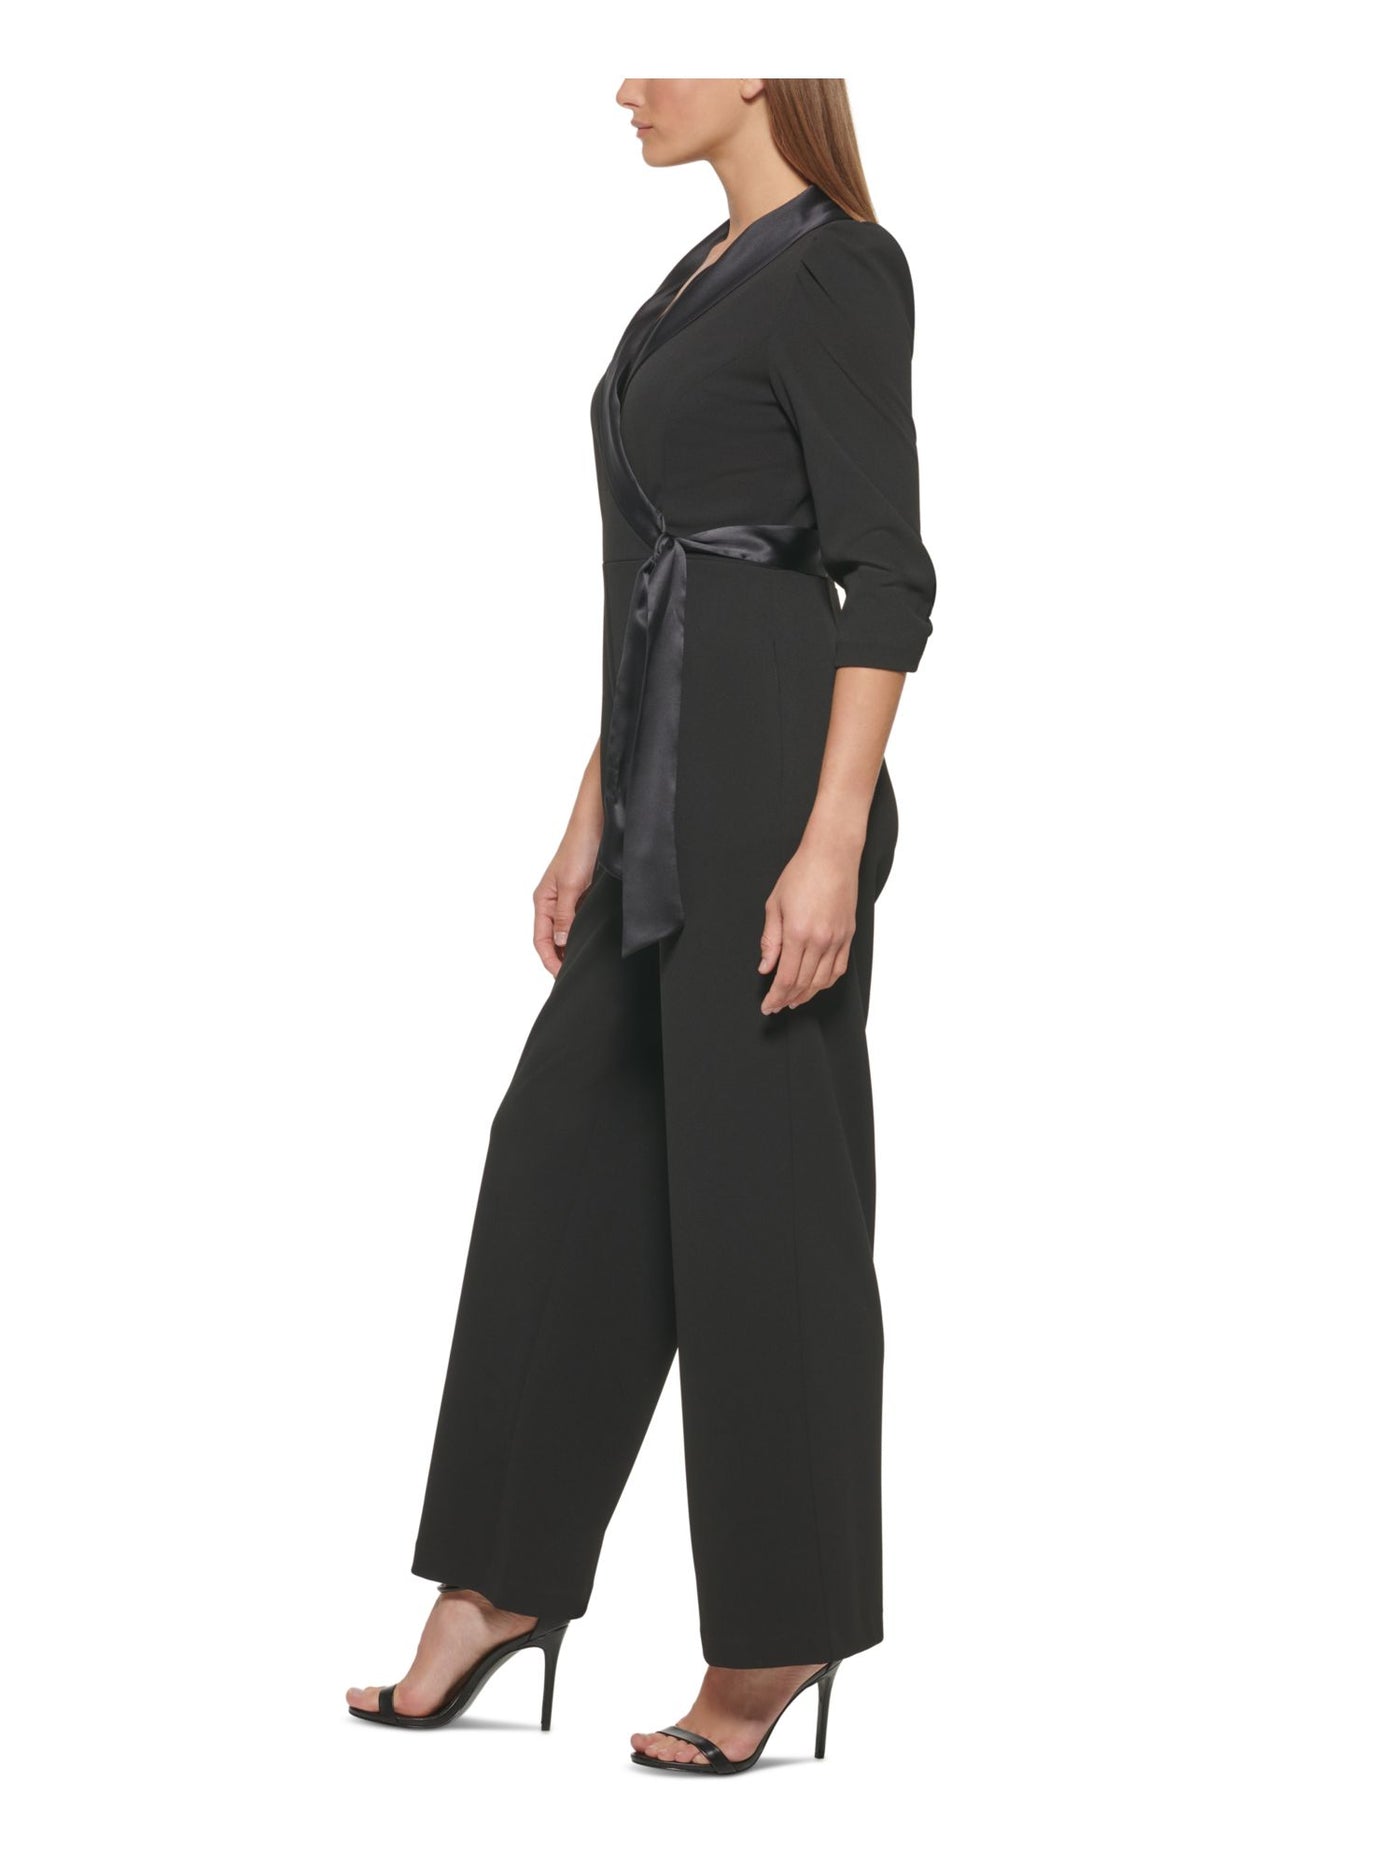 DKNY Womens Black Zippered Pocketed Ruched Button Cuffs Lined Bodice Elbow Sleeve Surplice Neckline Evening Wide Leg Jumpsuit 4